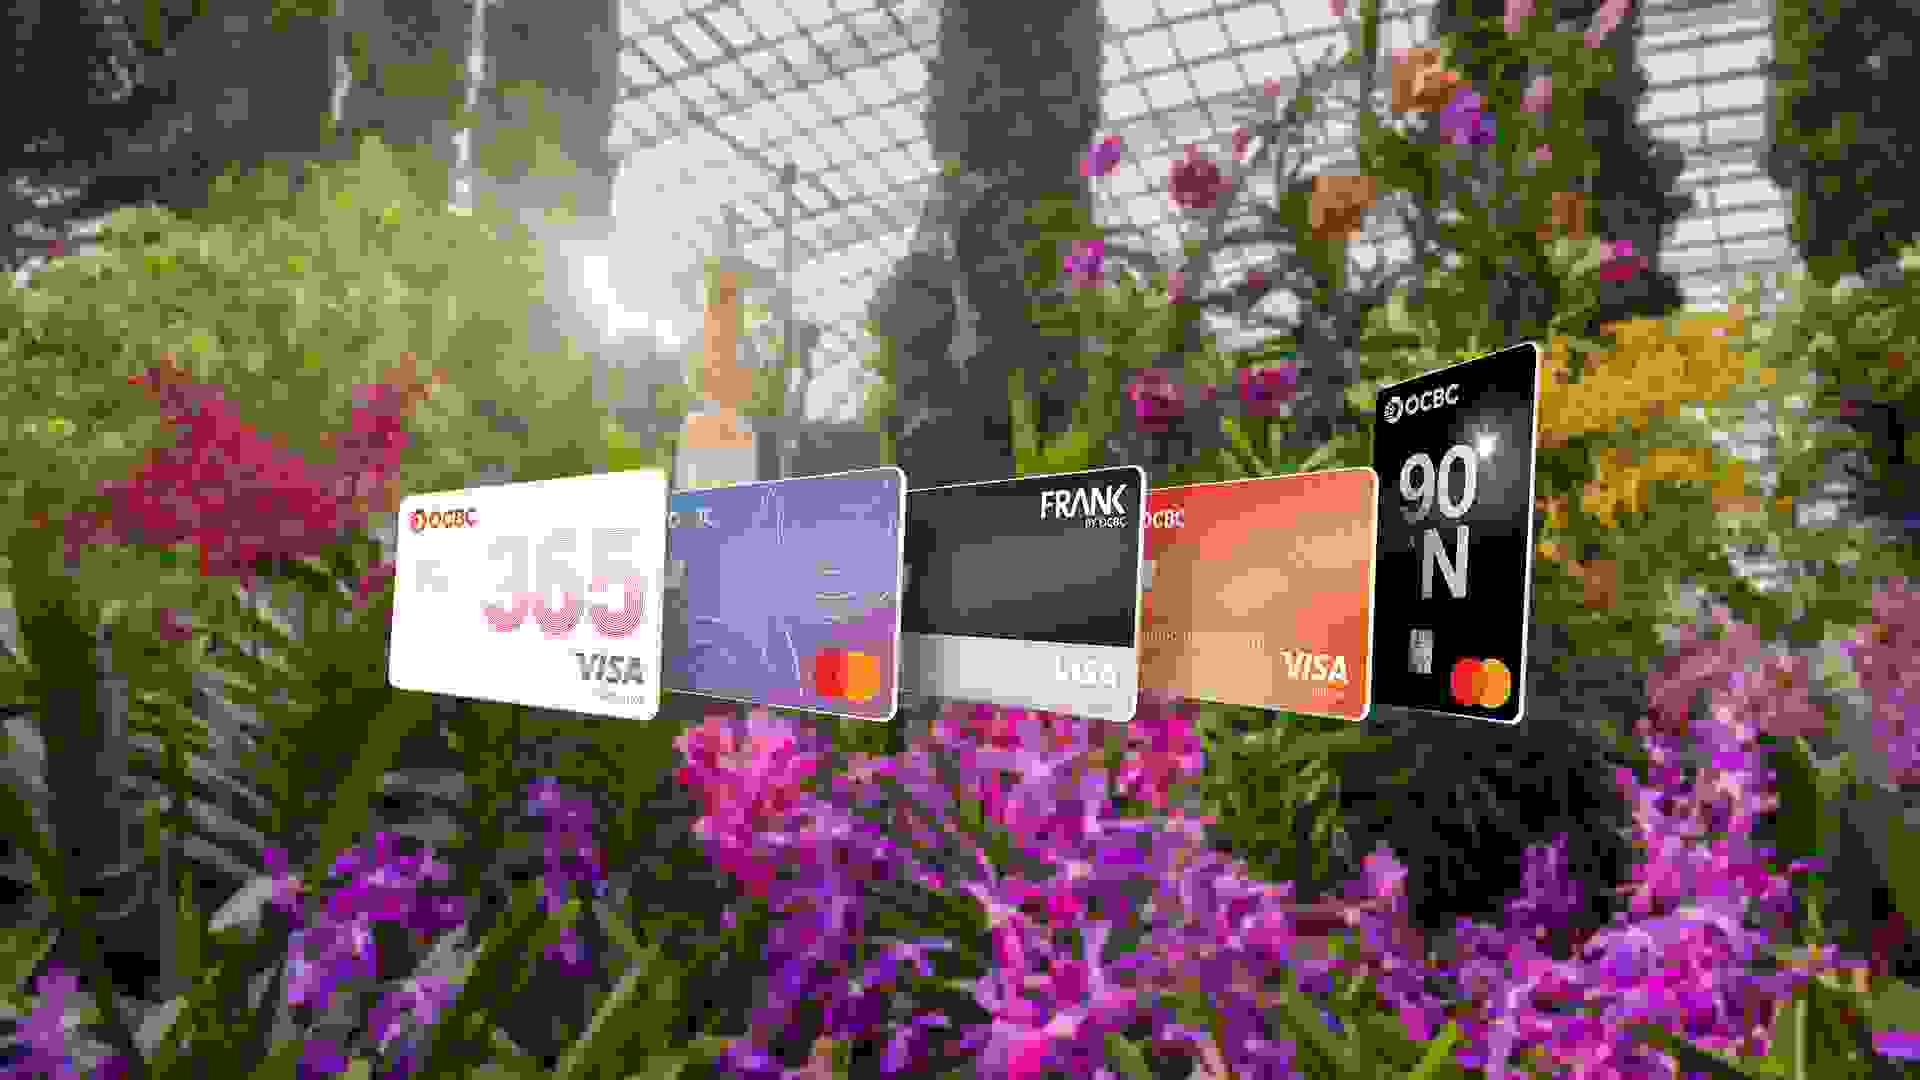 10% off Flower Dome tickets with OCBC Cards